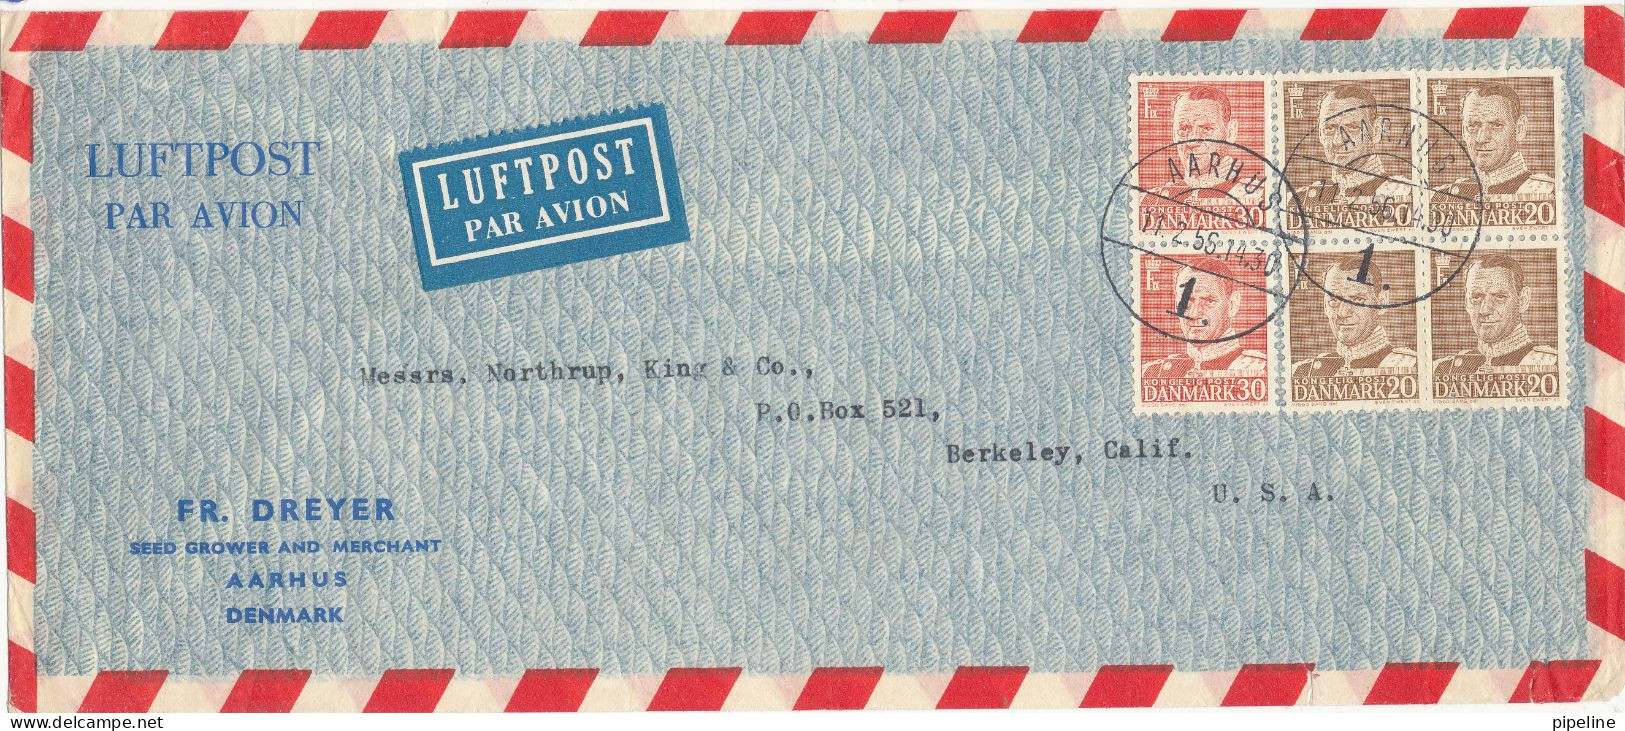 Denmark Air Mail Cover Sent To USA Aarhus 11-2-1956 Fr. Dreyer Seed Grower And Merchant - Posta Aerea